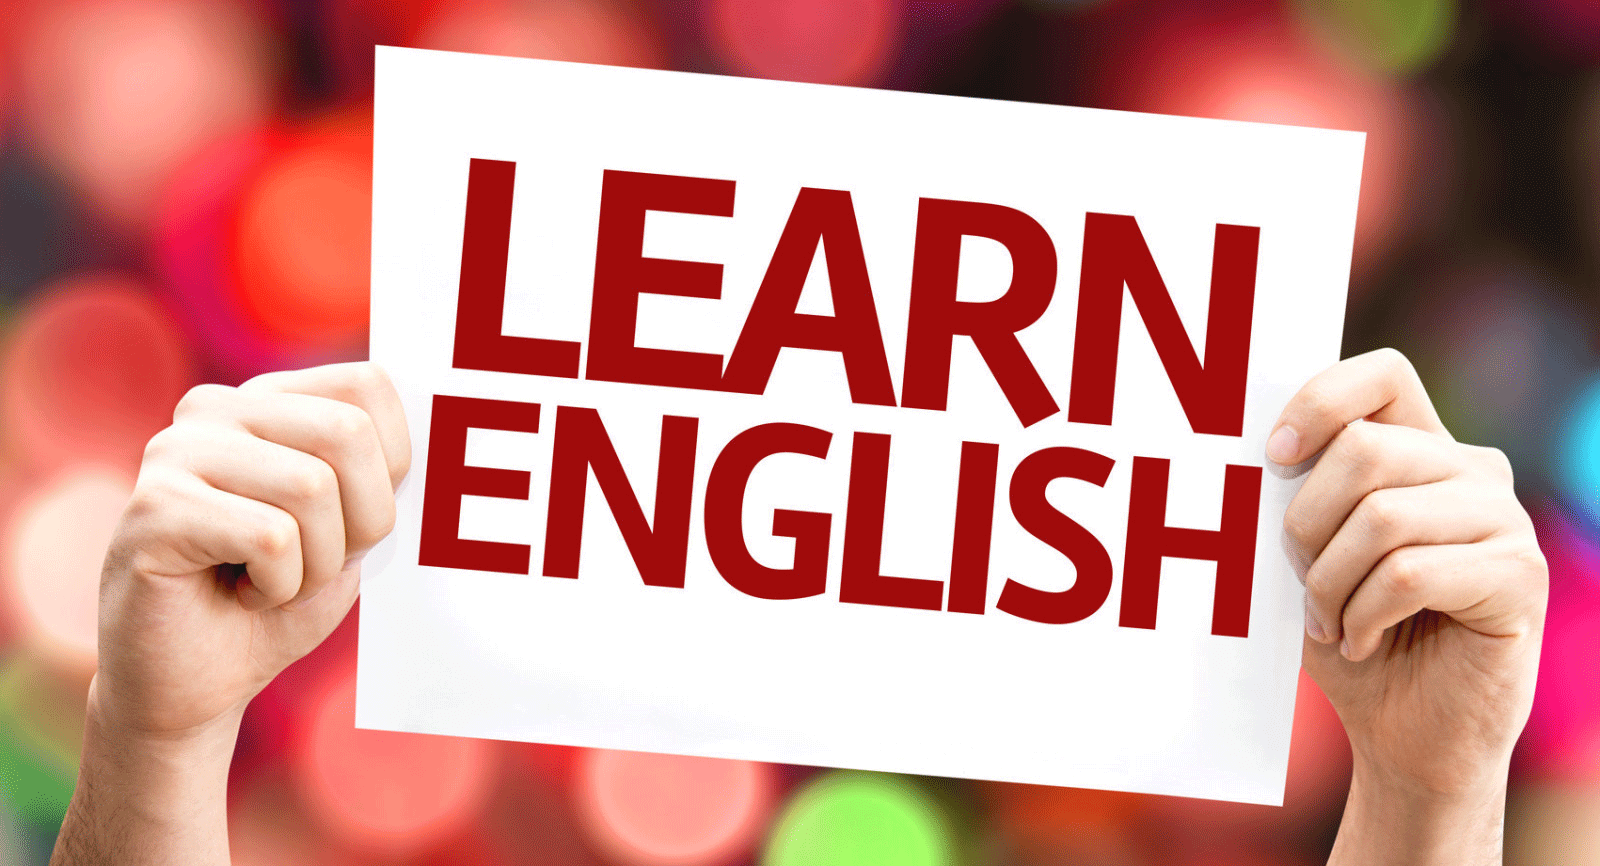 How can knowing English affect your income?